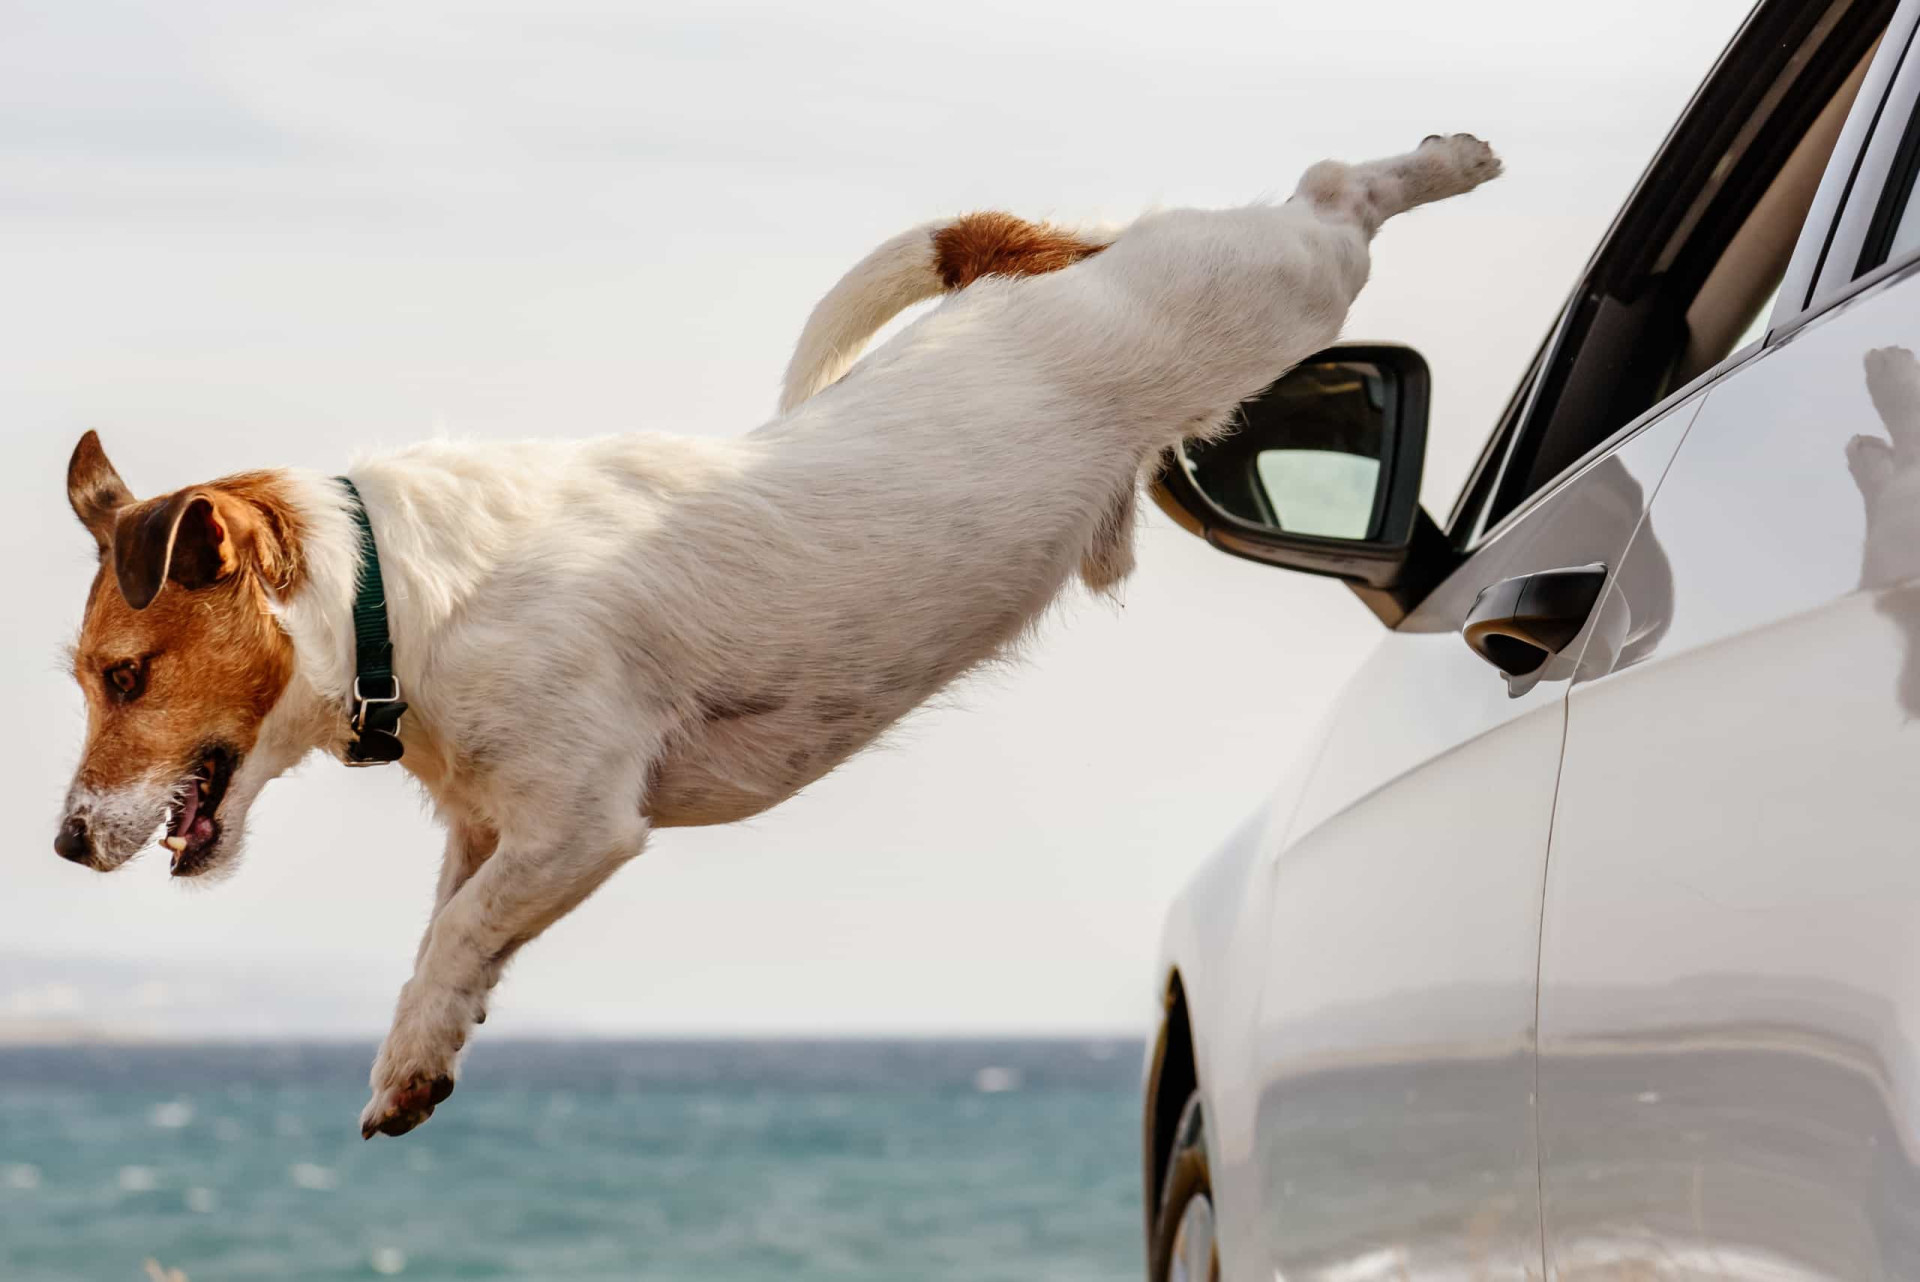 <p>Not only can your dog be hit by another vehicle or an object, but the pooch can also fall or jump out of the window.</p><p><a href="https://www.msn.com/en-us/community/channel/vid-7xx8mnucu55yw63we9va2gwr7uihbxwc68fxqp25x6tg4ftibpra?cvid=94631541bc0f4f89bfd59158d696ad7e">Follow us and access great exclusive content every day</a></p>